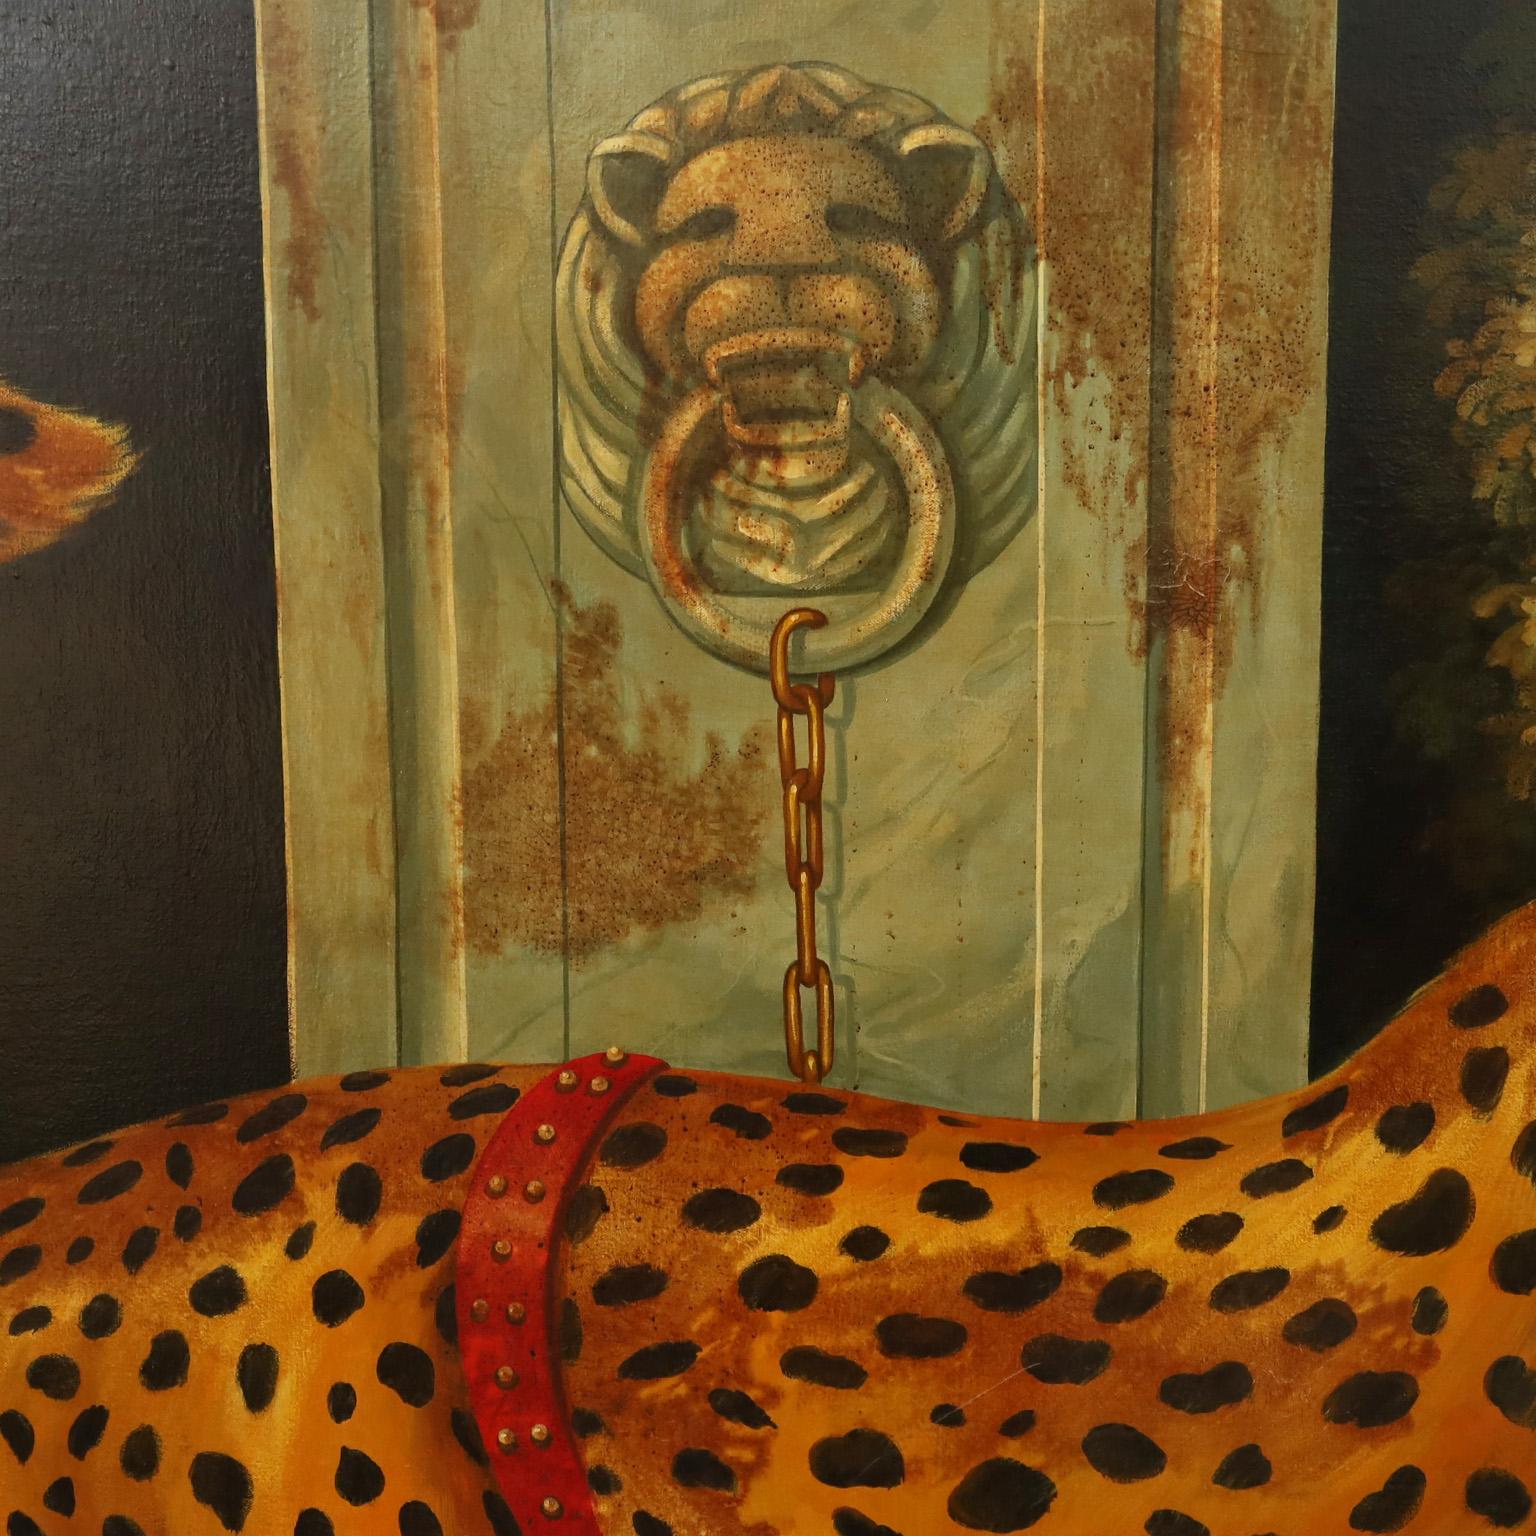 William Skilling Oil Painting on Canvas of a Cheetah 8